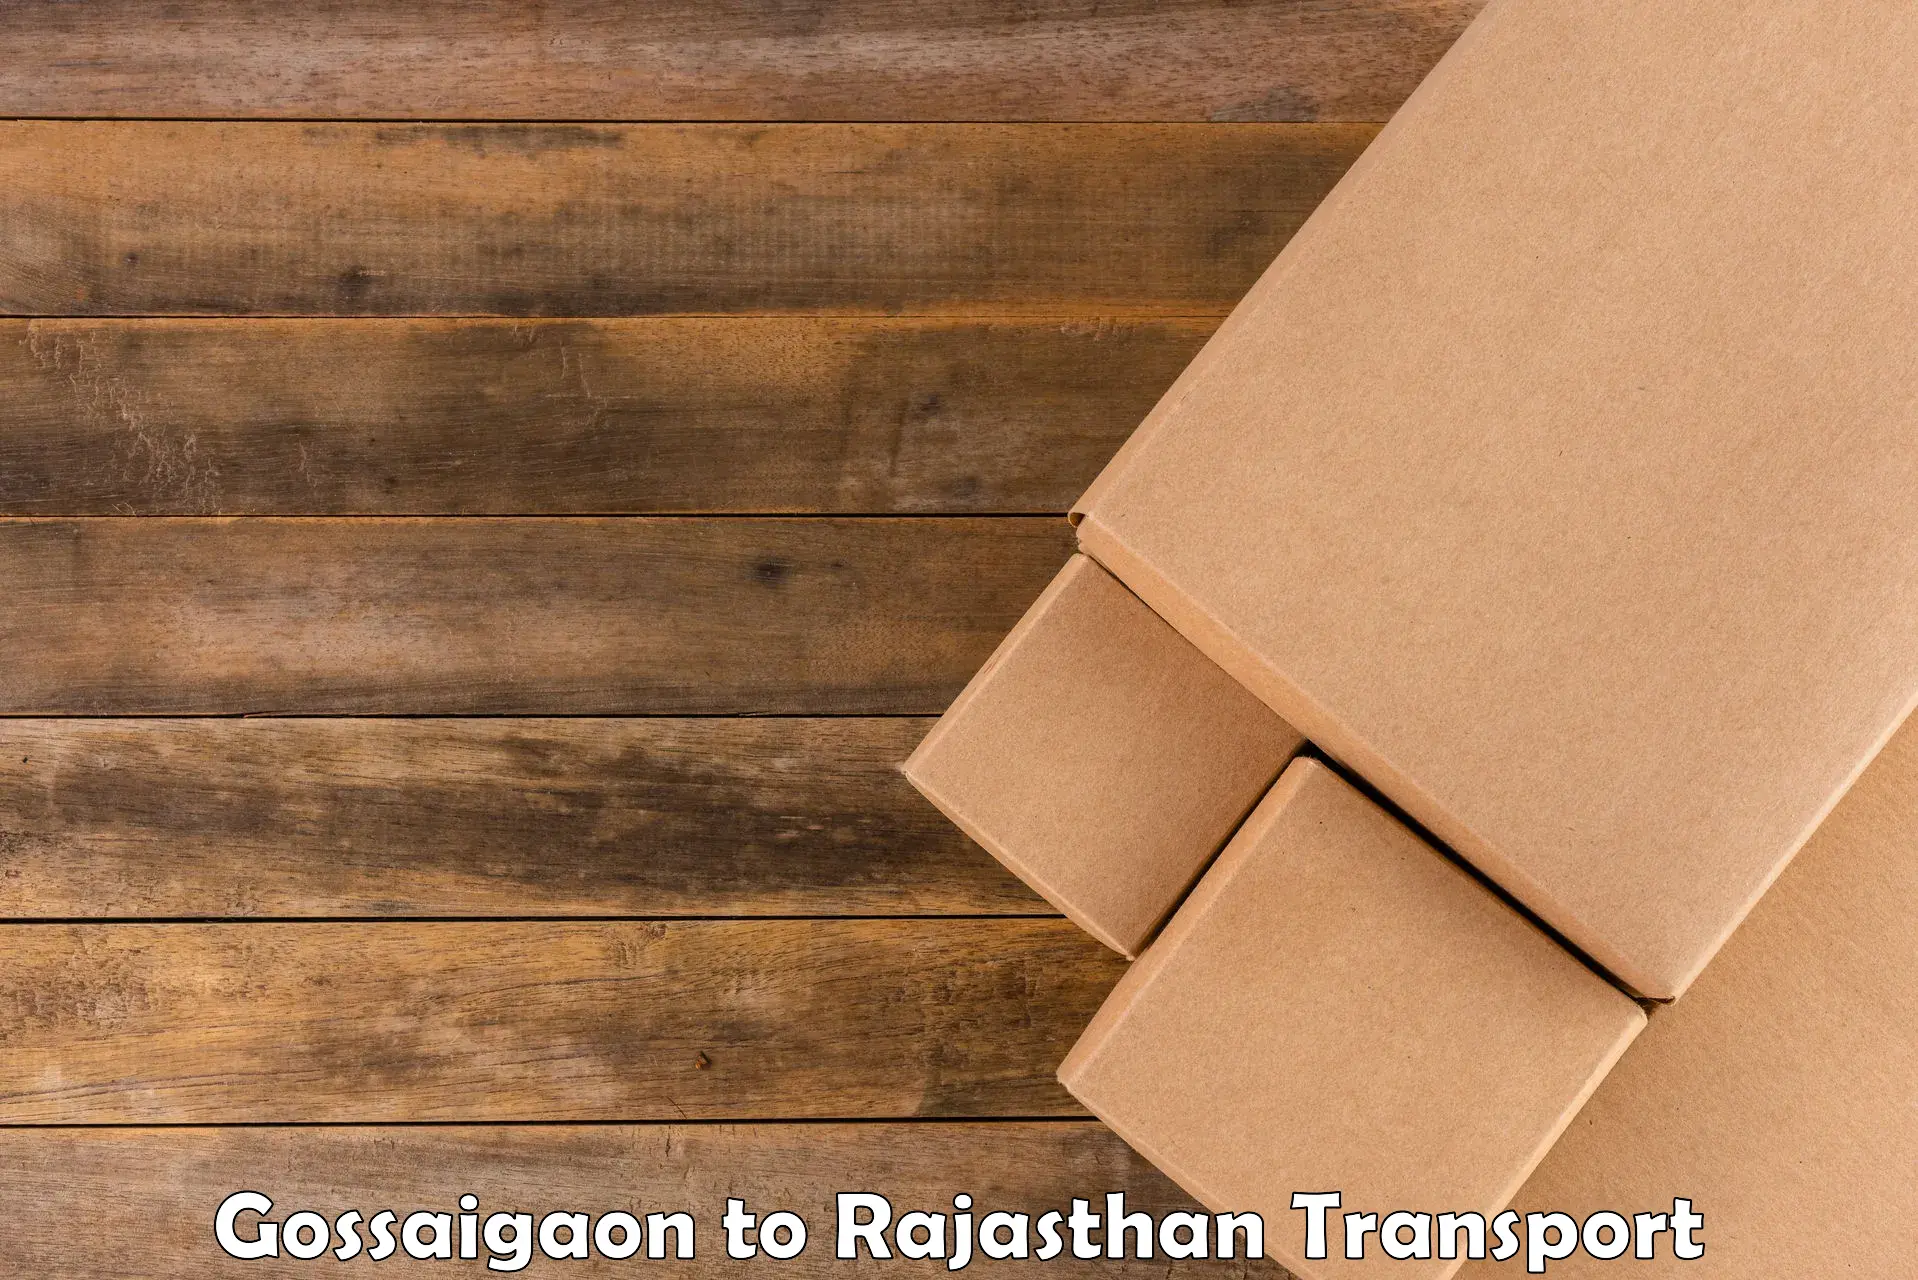 Goods delivery service Gossaigaon to Bassi